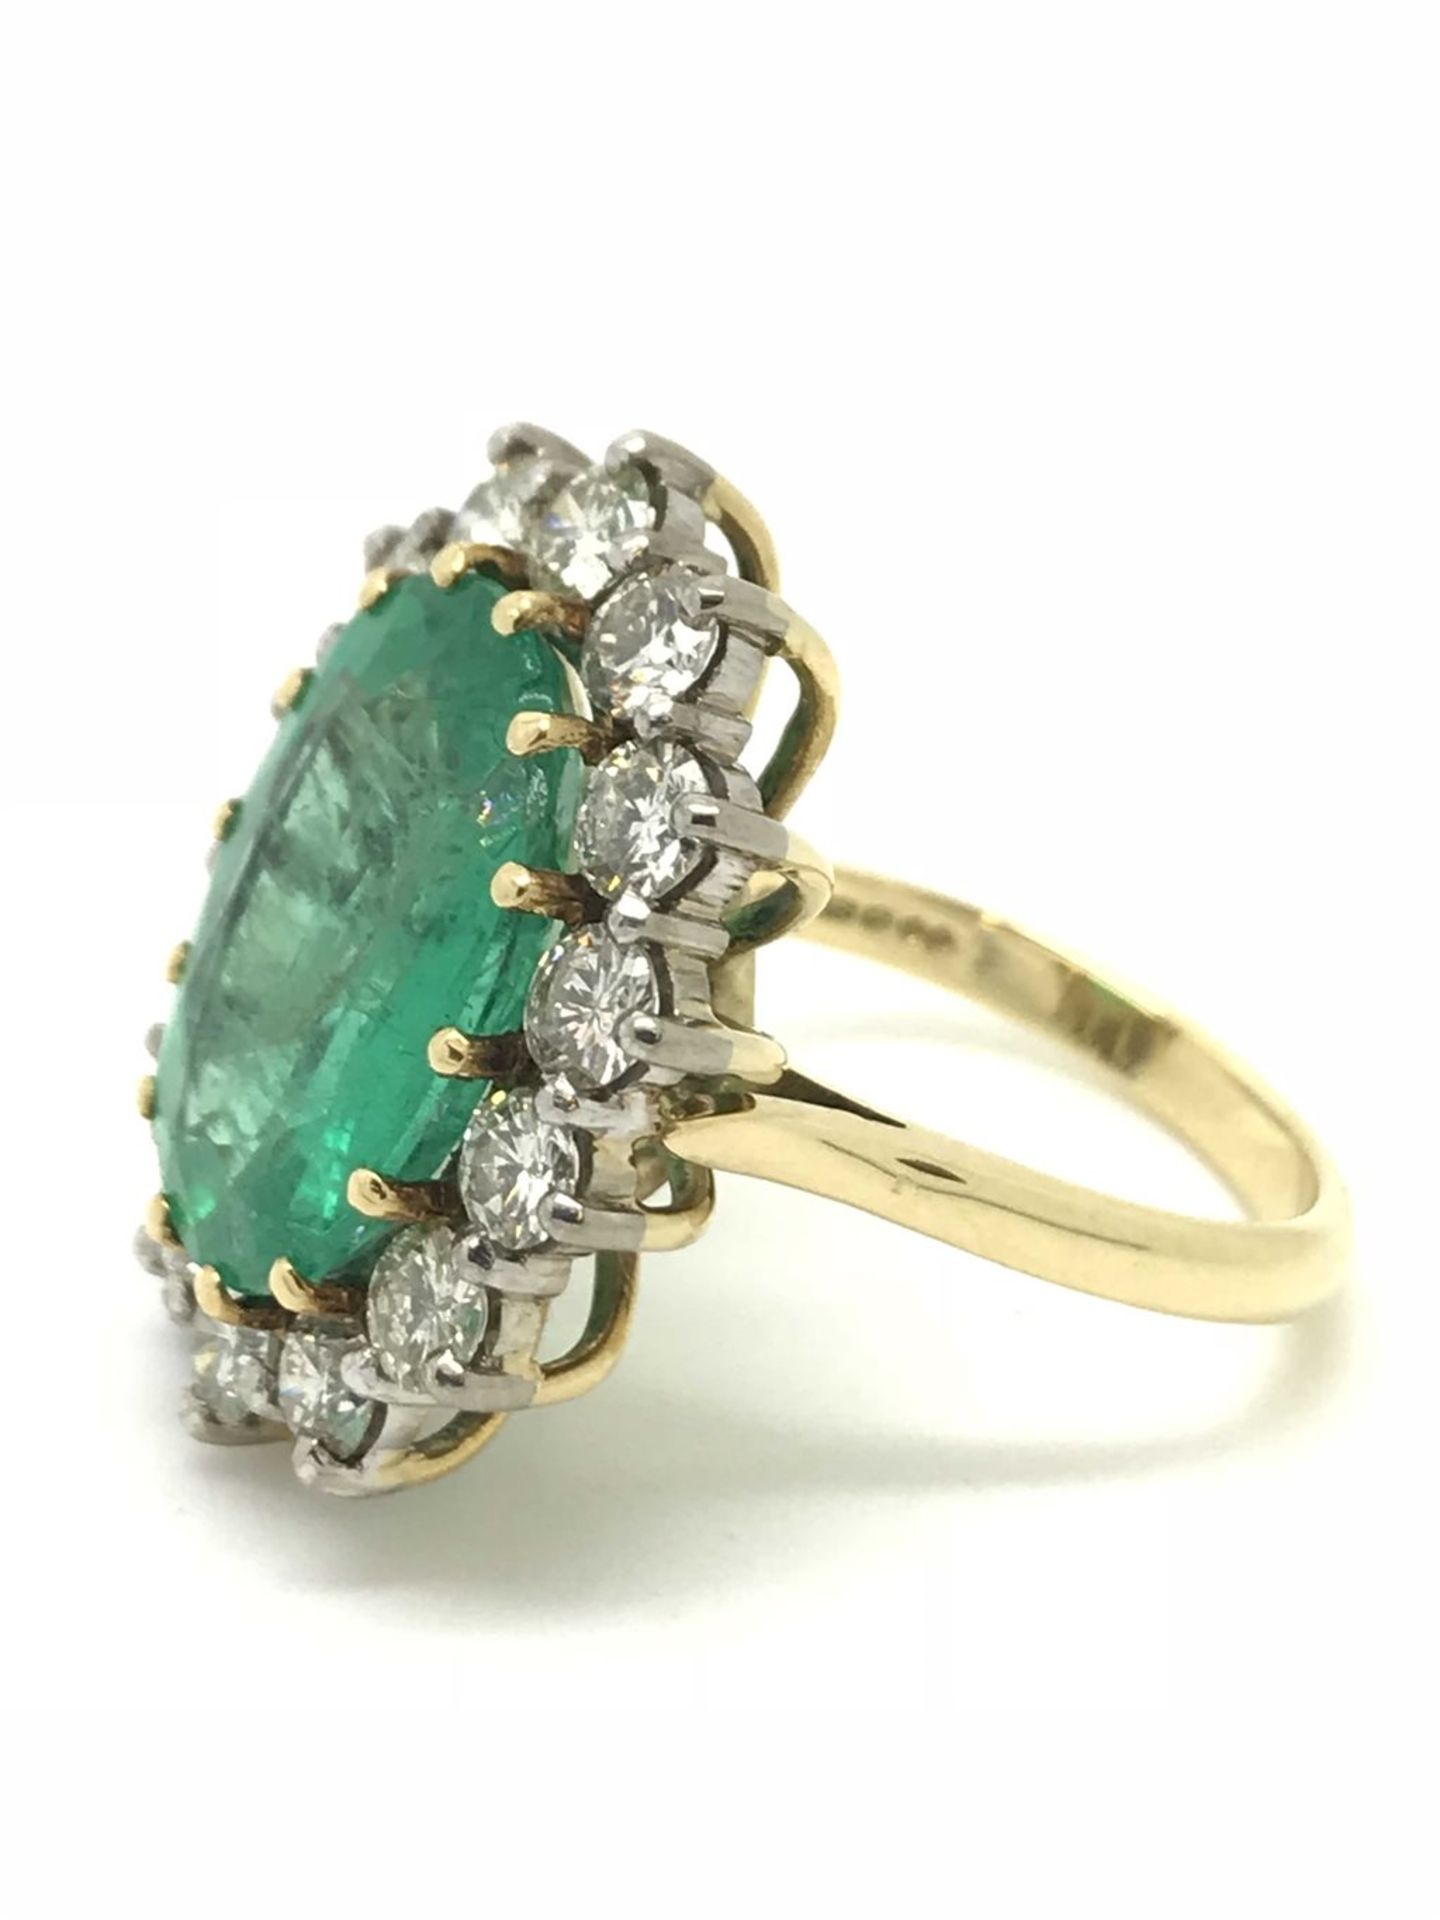 Emerald (6.93ct) & Diamond (2.10ct) Large Cluster Ring - 18ct - Image 2 of 4